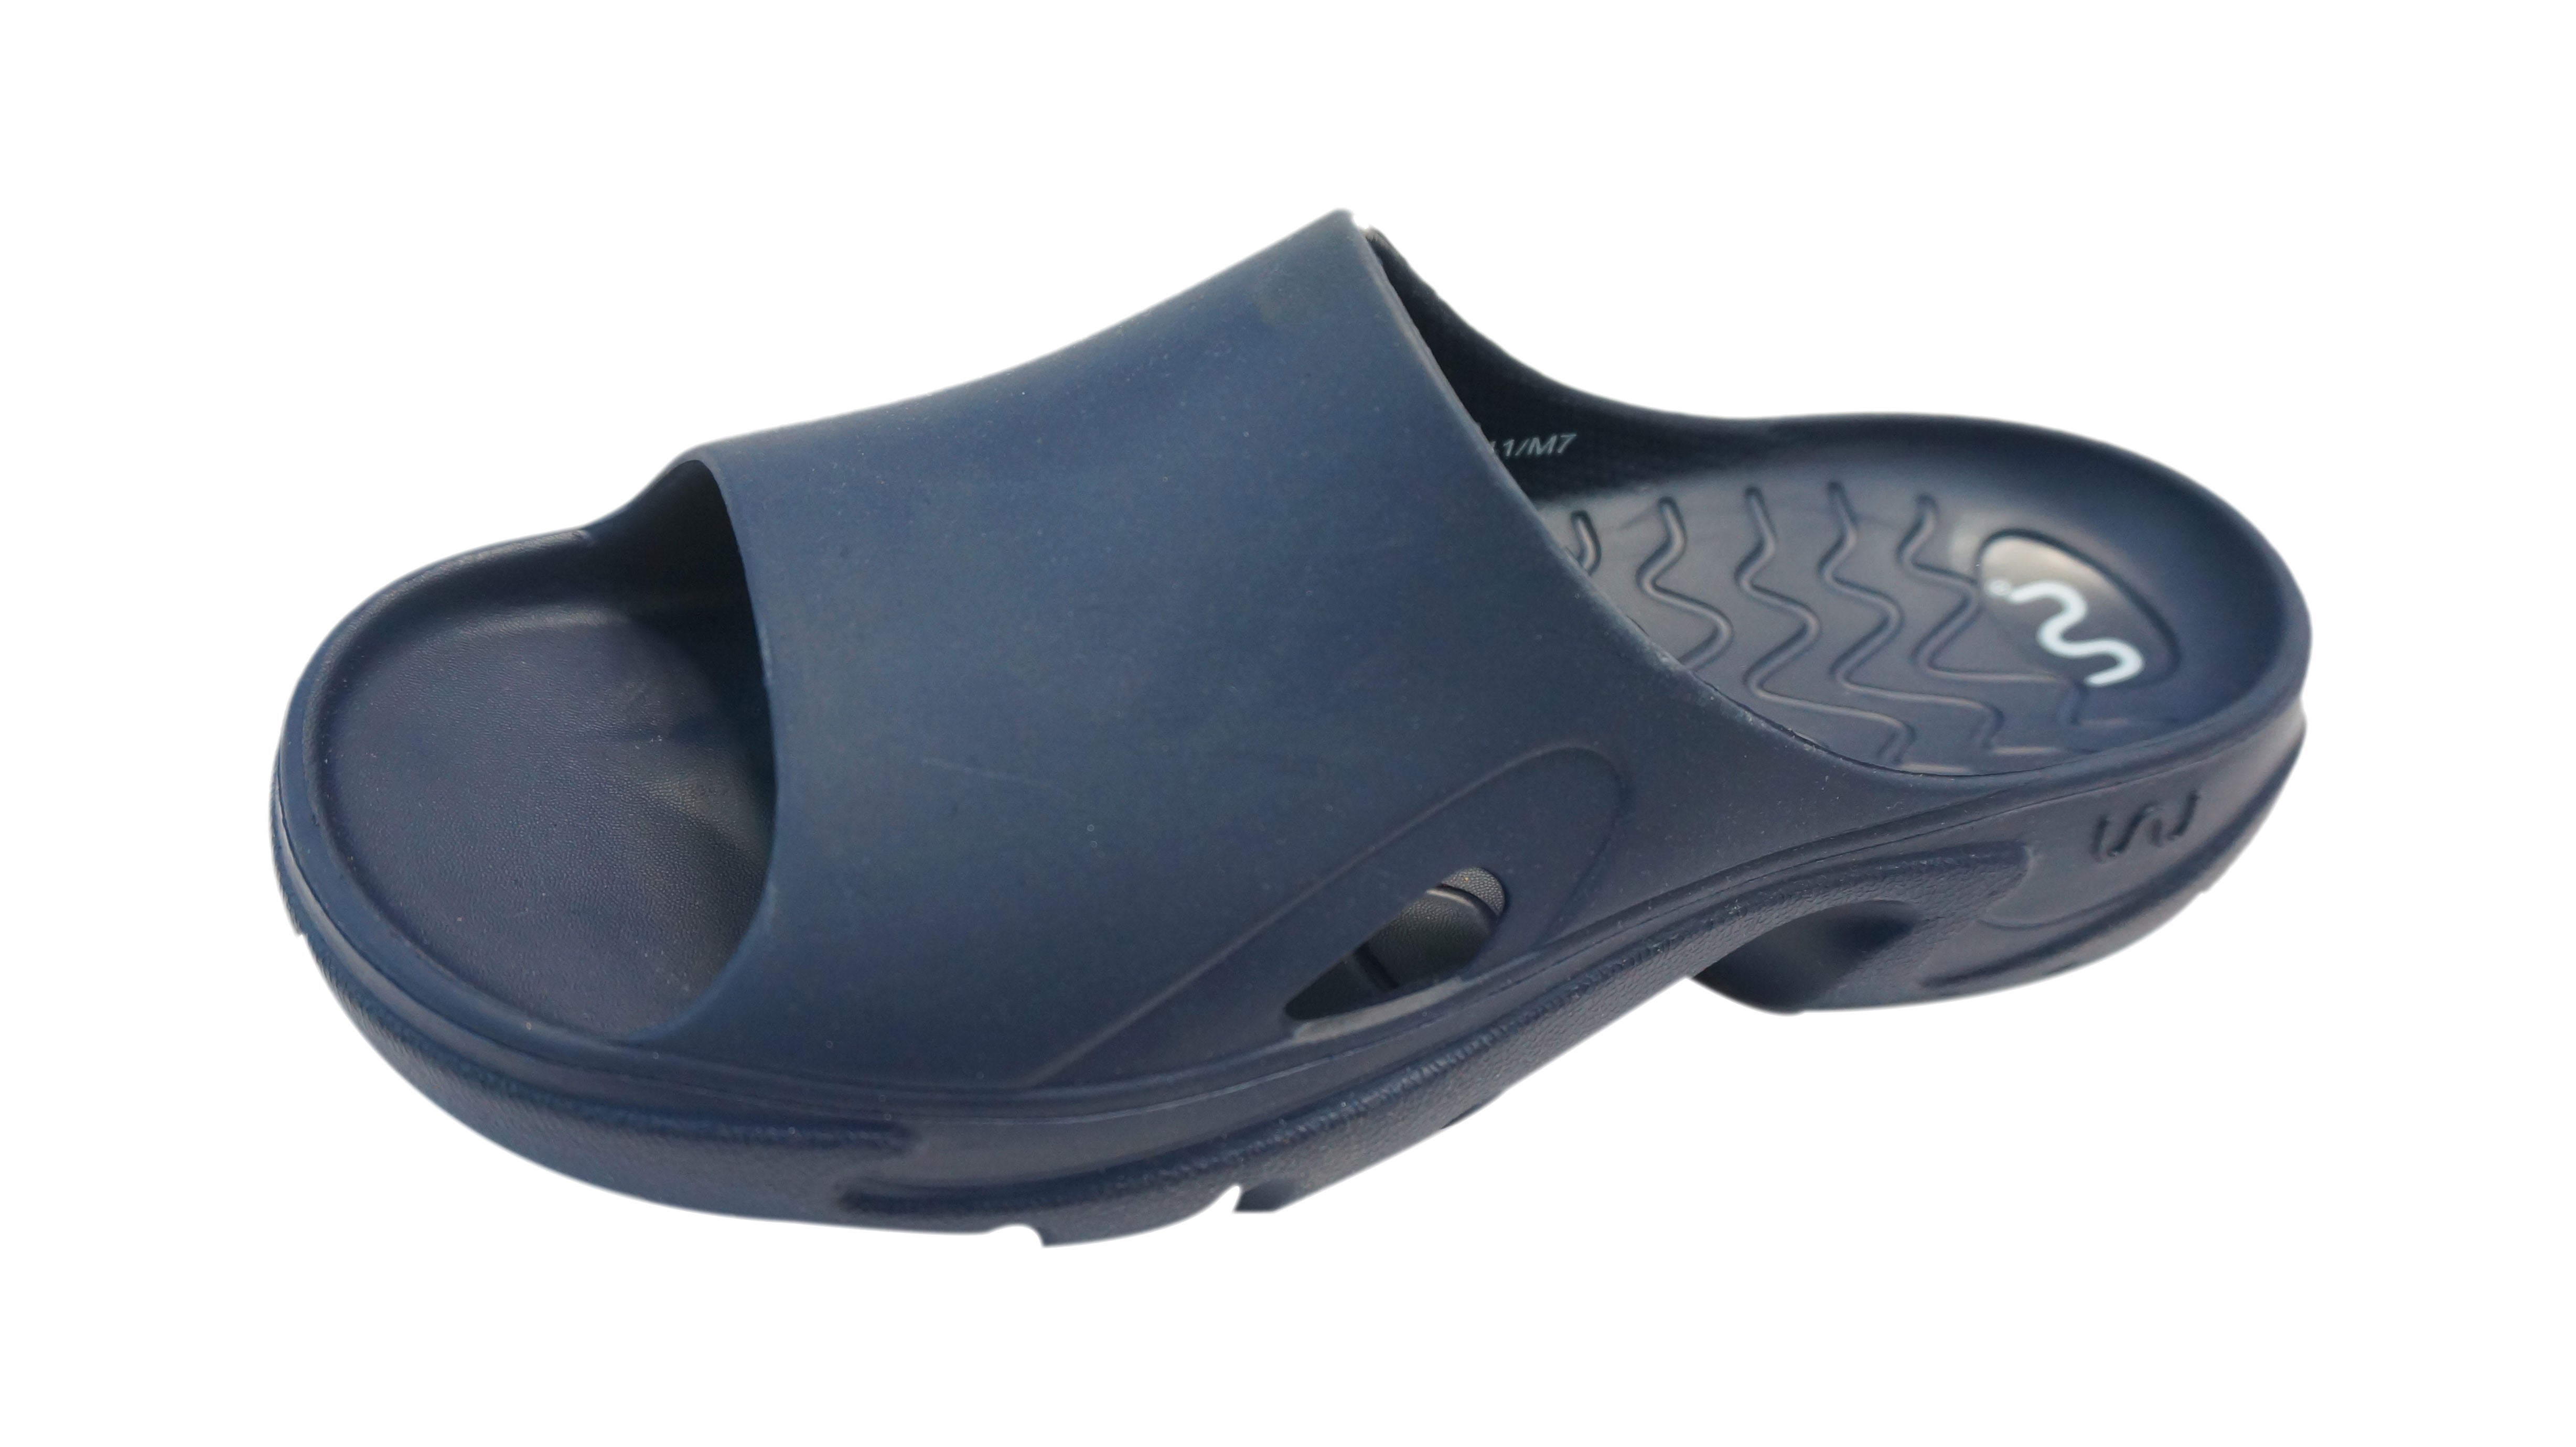 Doubleu Roma Slider for Men Comfortable Recovery Footwear (Does Not Shrink) (Navy Blue)